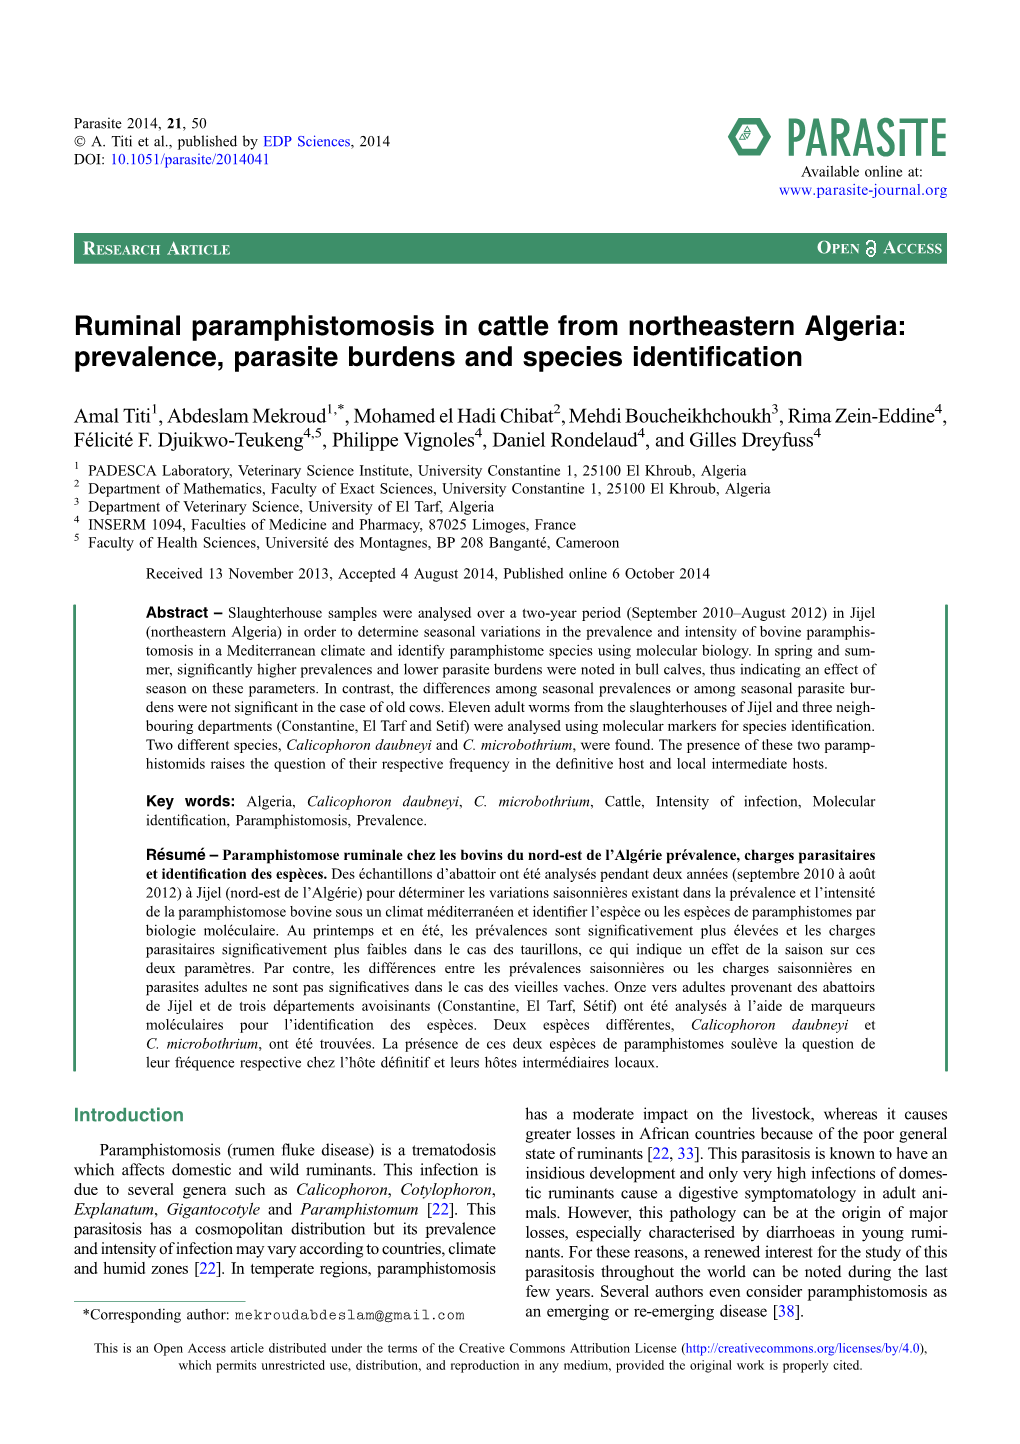 Ruminal Paramphistomosis in Cattle from Northeastern Algeria: Prevalence, Parasite Burdens and Species Identiﬁcation